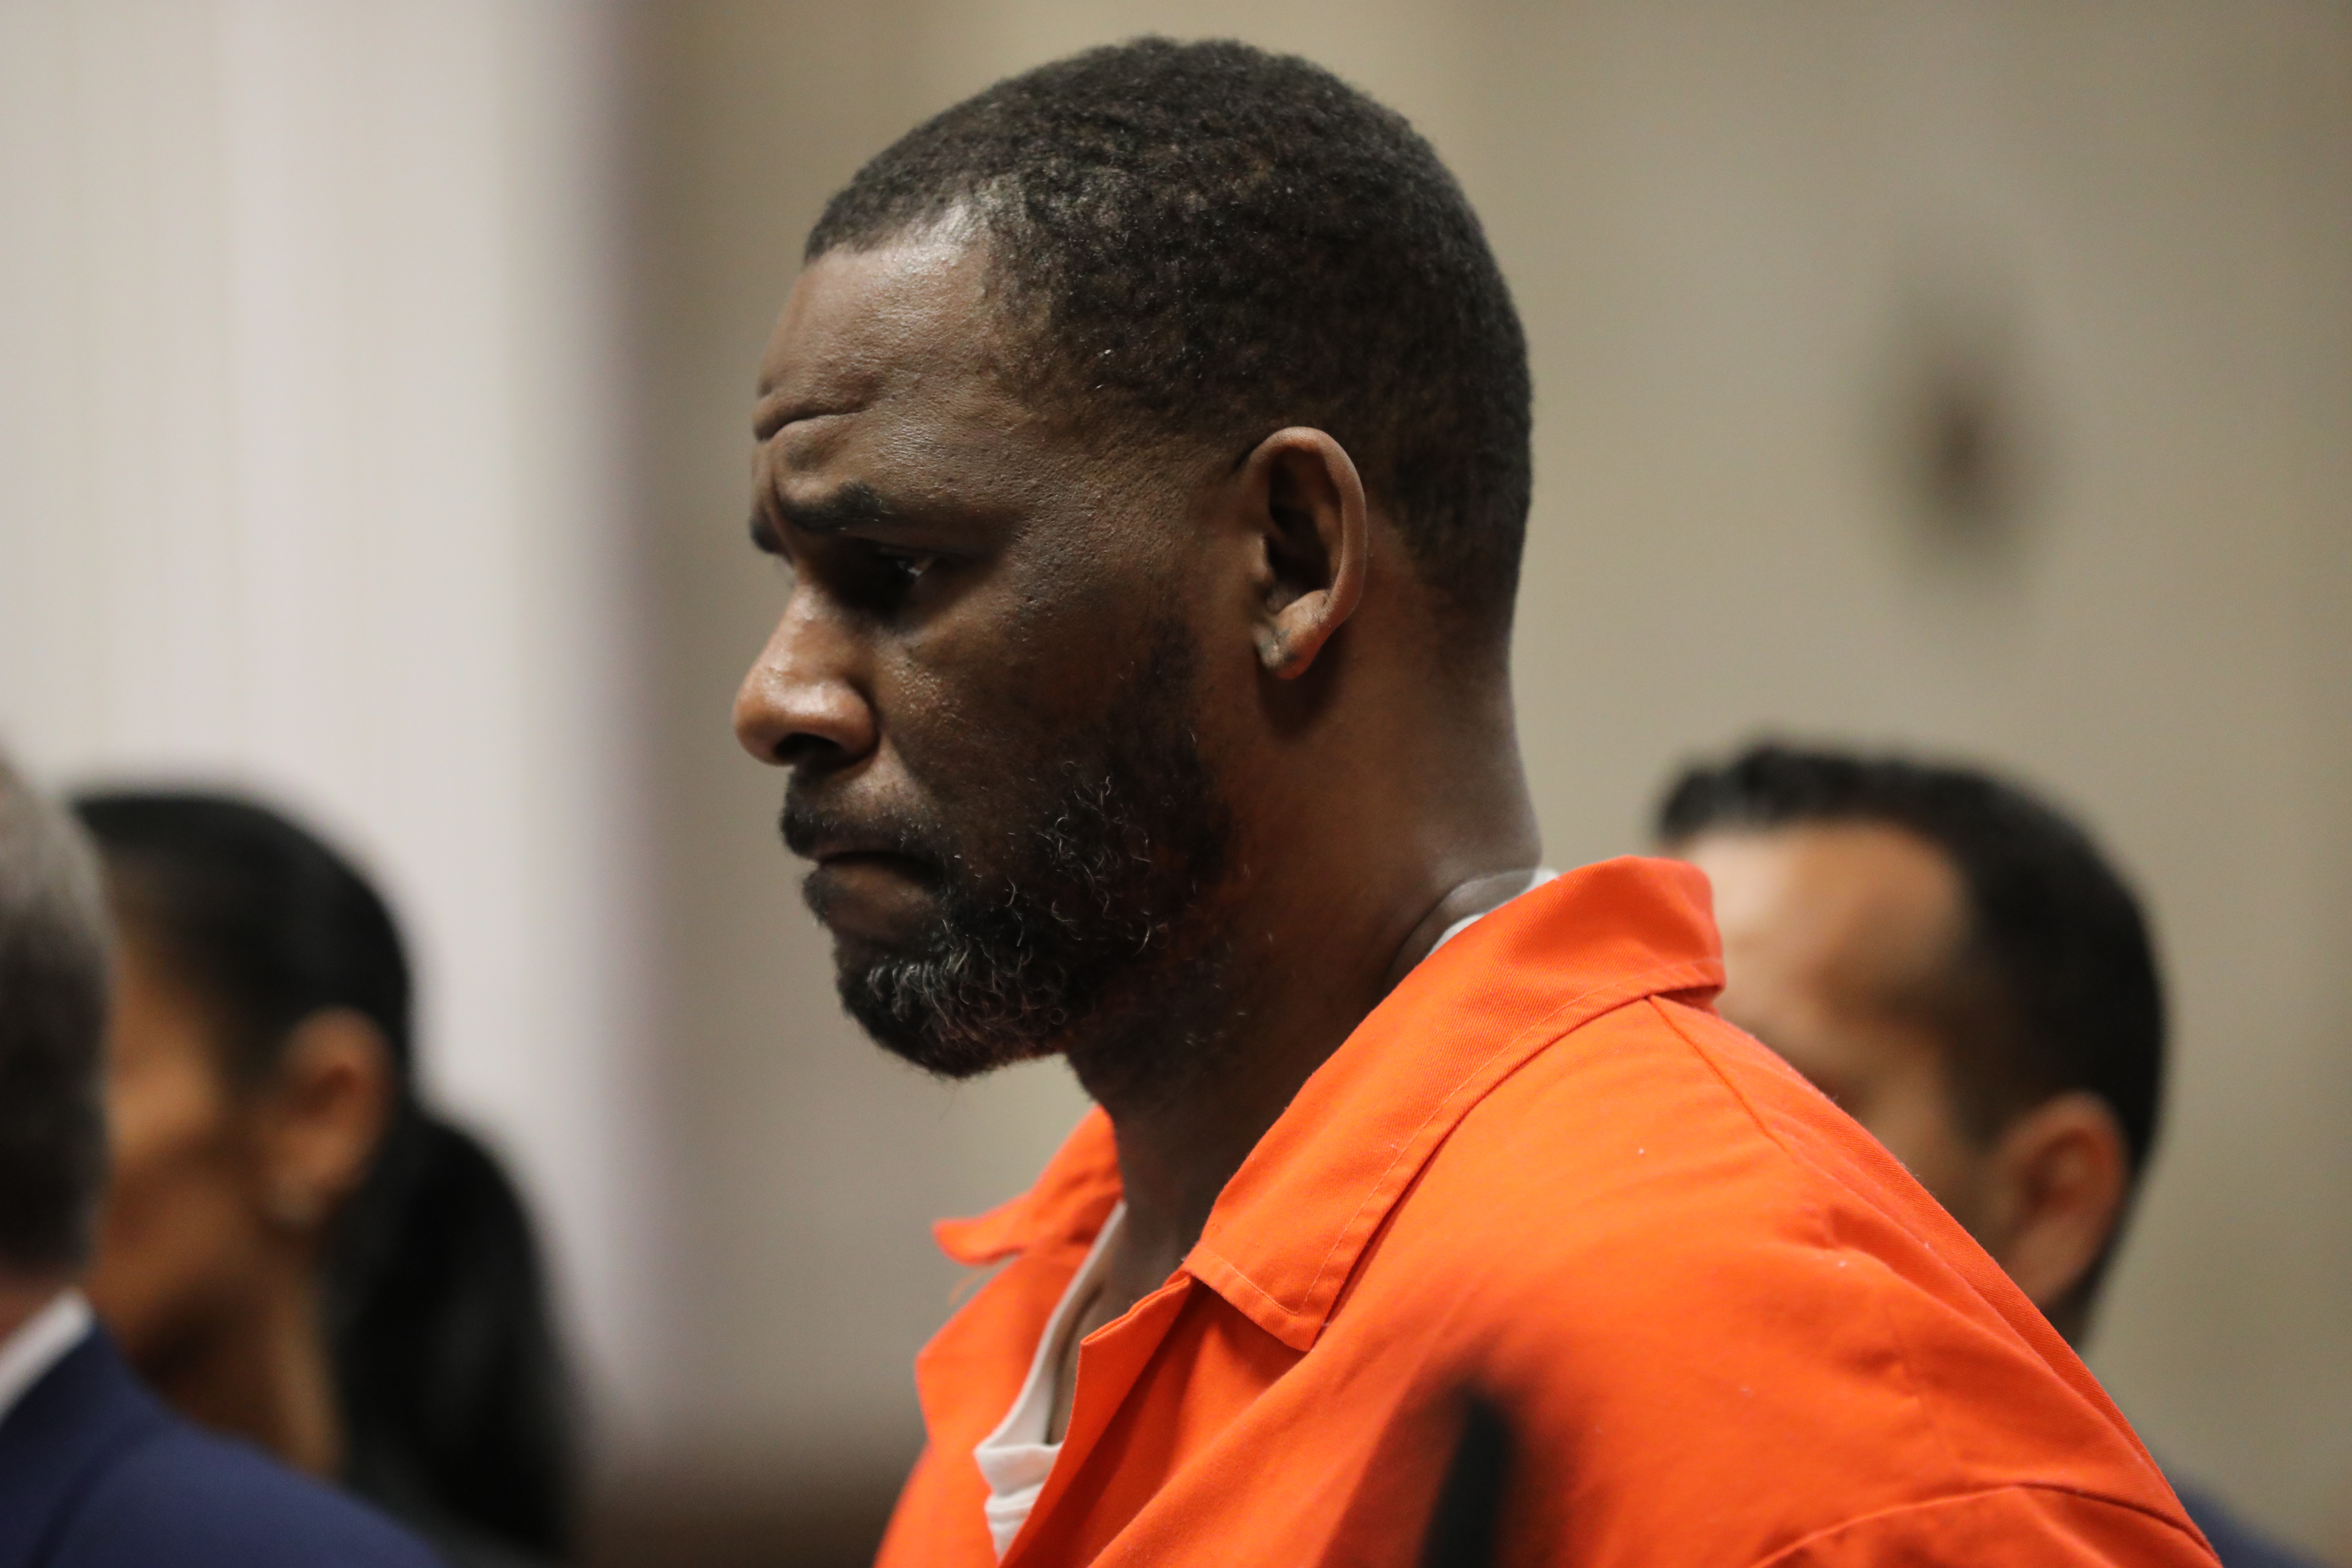 A judge declined to return the $100,000 bail money that Valencia Love used back in February to help R. Kelly get out of jail.